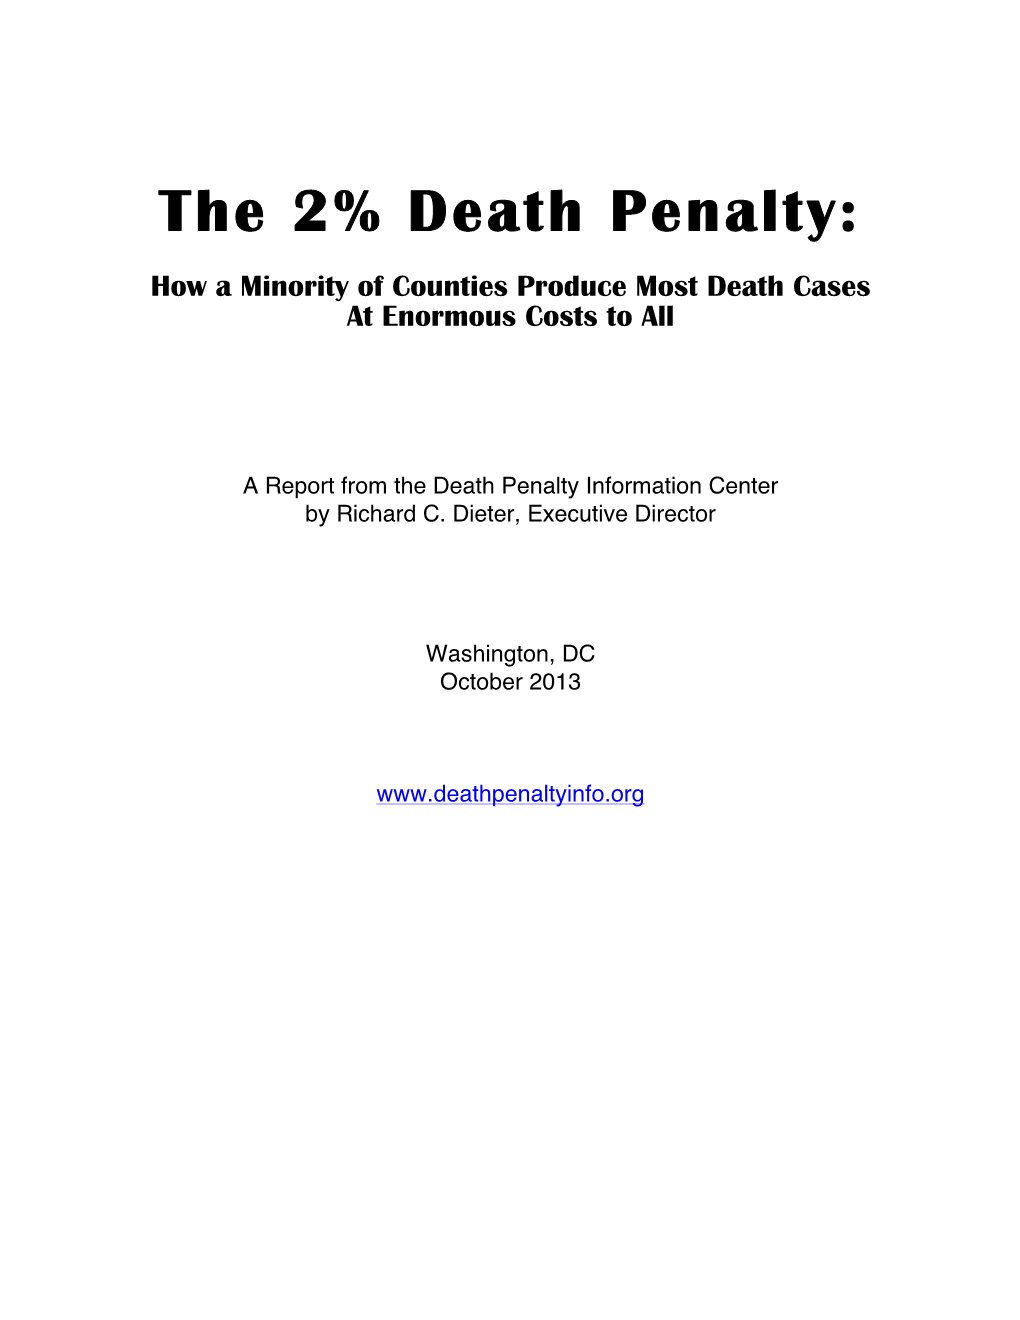 The 2% Death Penalty